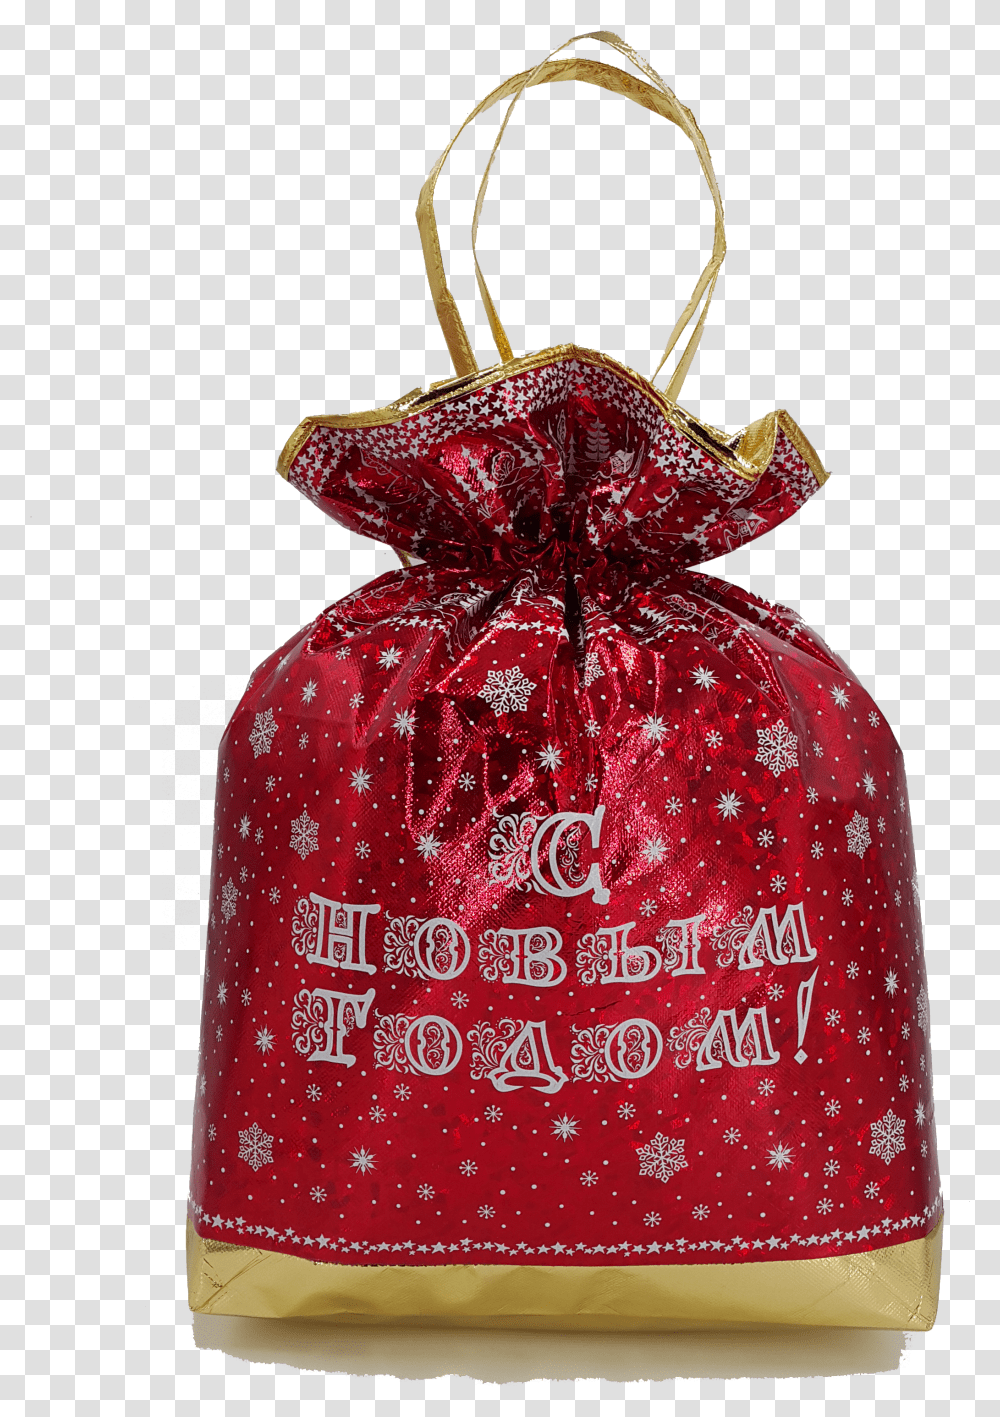 Download Hd M 10r Christmas Ornament Image Sparkly Transparent Png